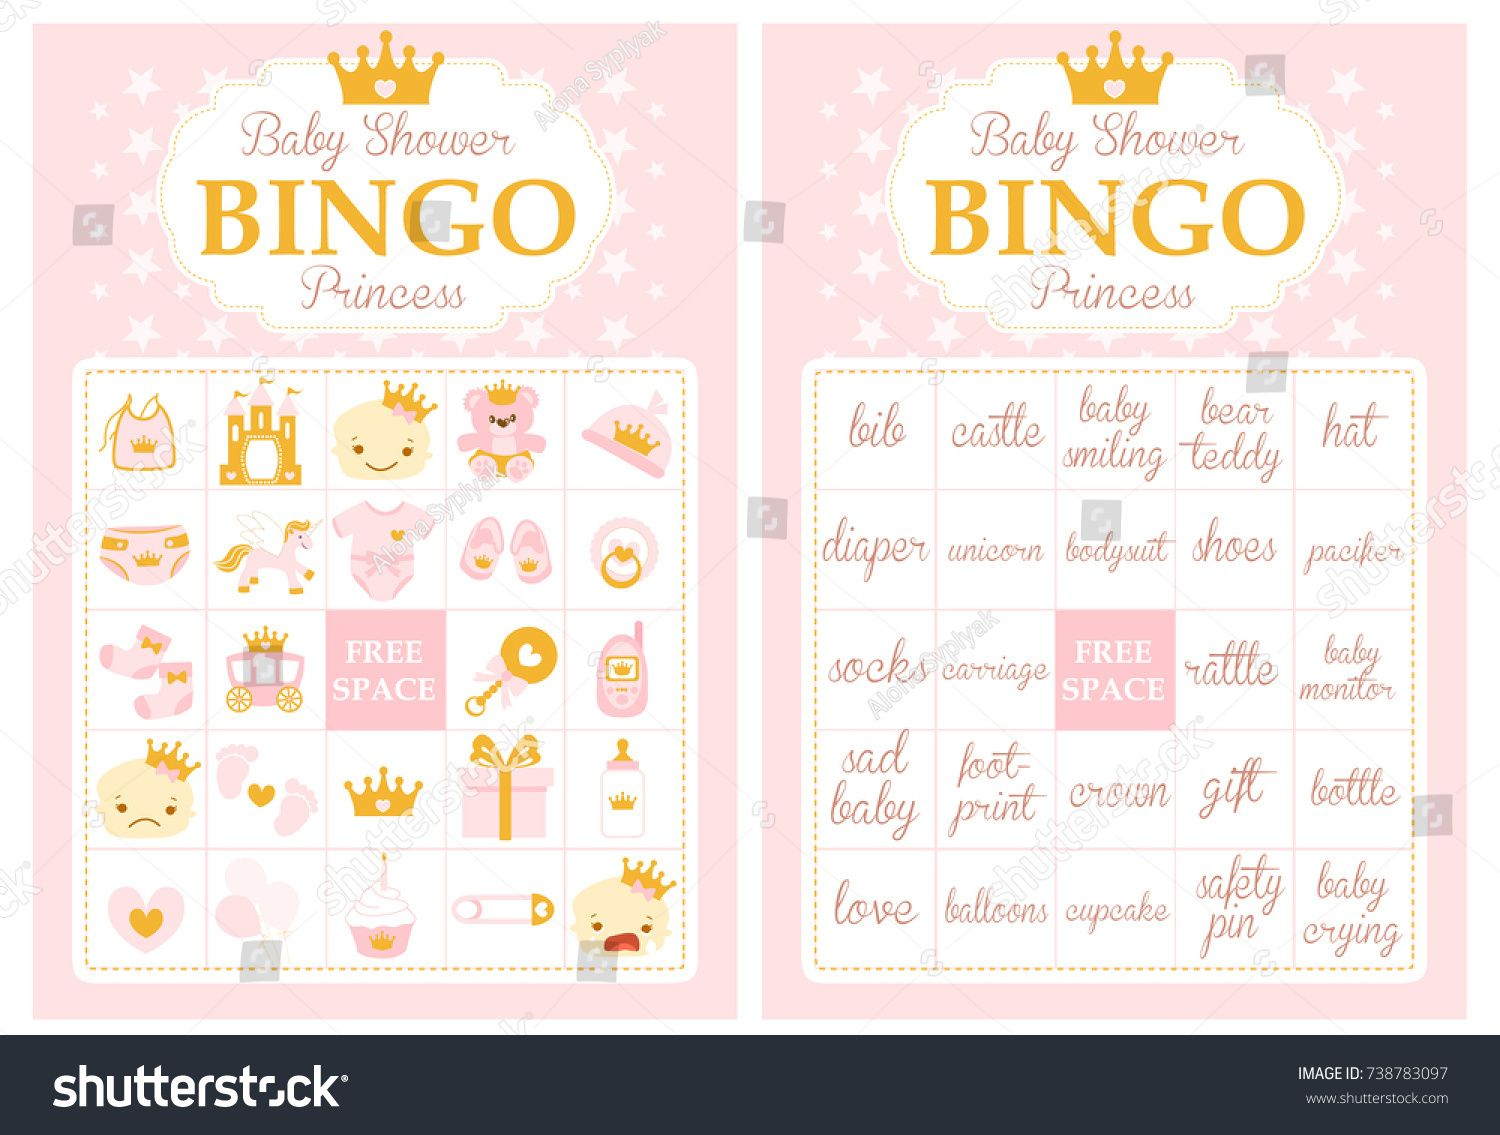 Pink And Gold Princess Baby Shower Party. Bingo Game